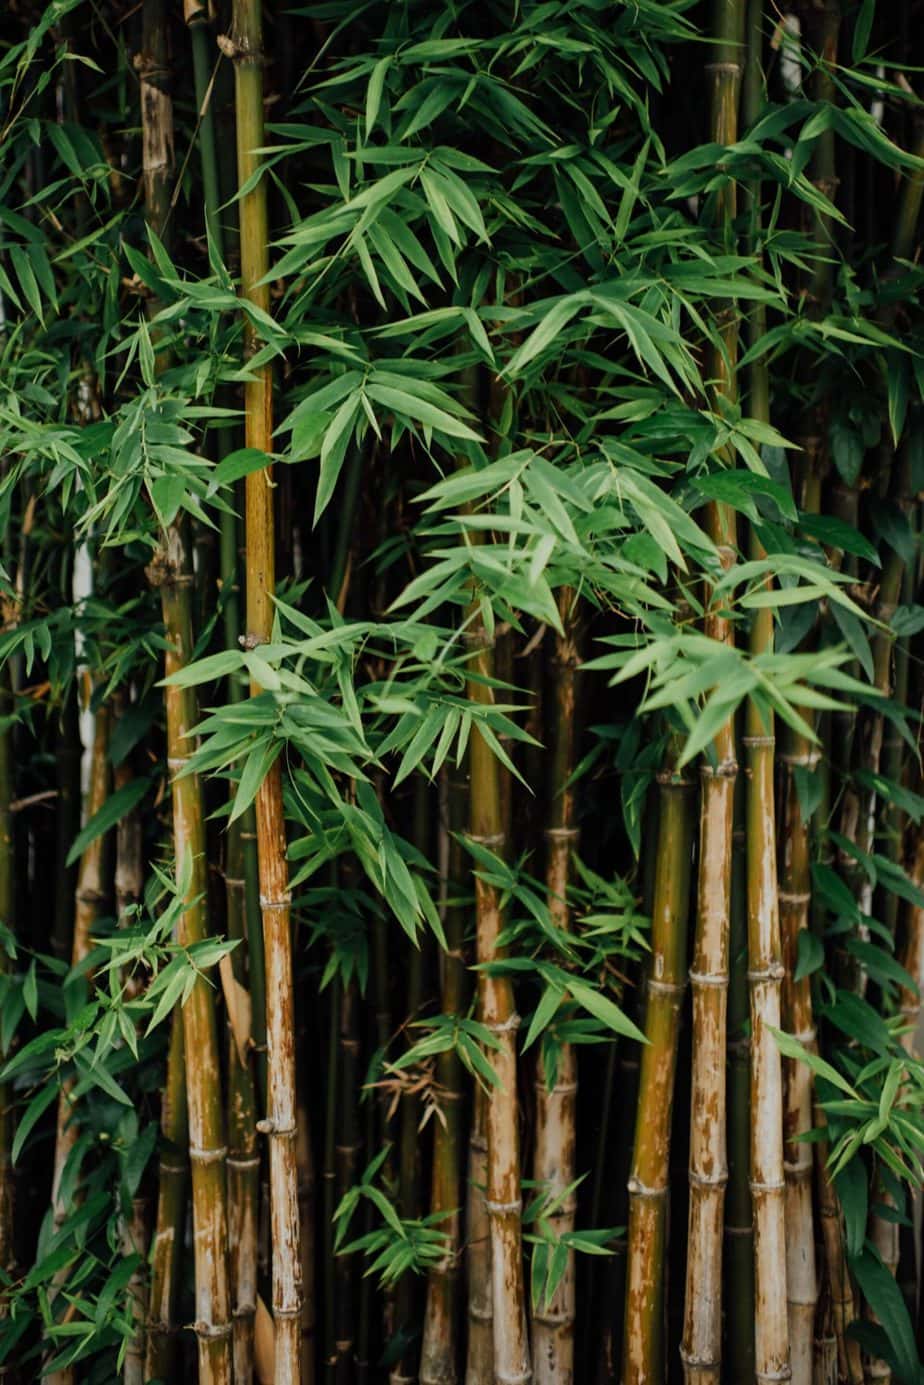 Bamboo bioferment – learn about its use in skin care